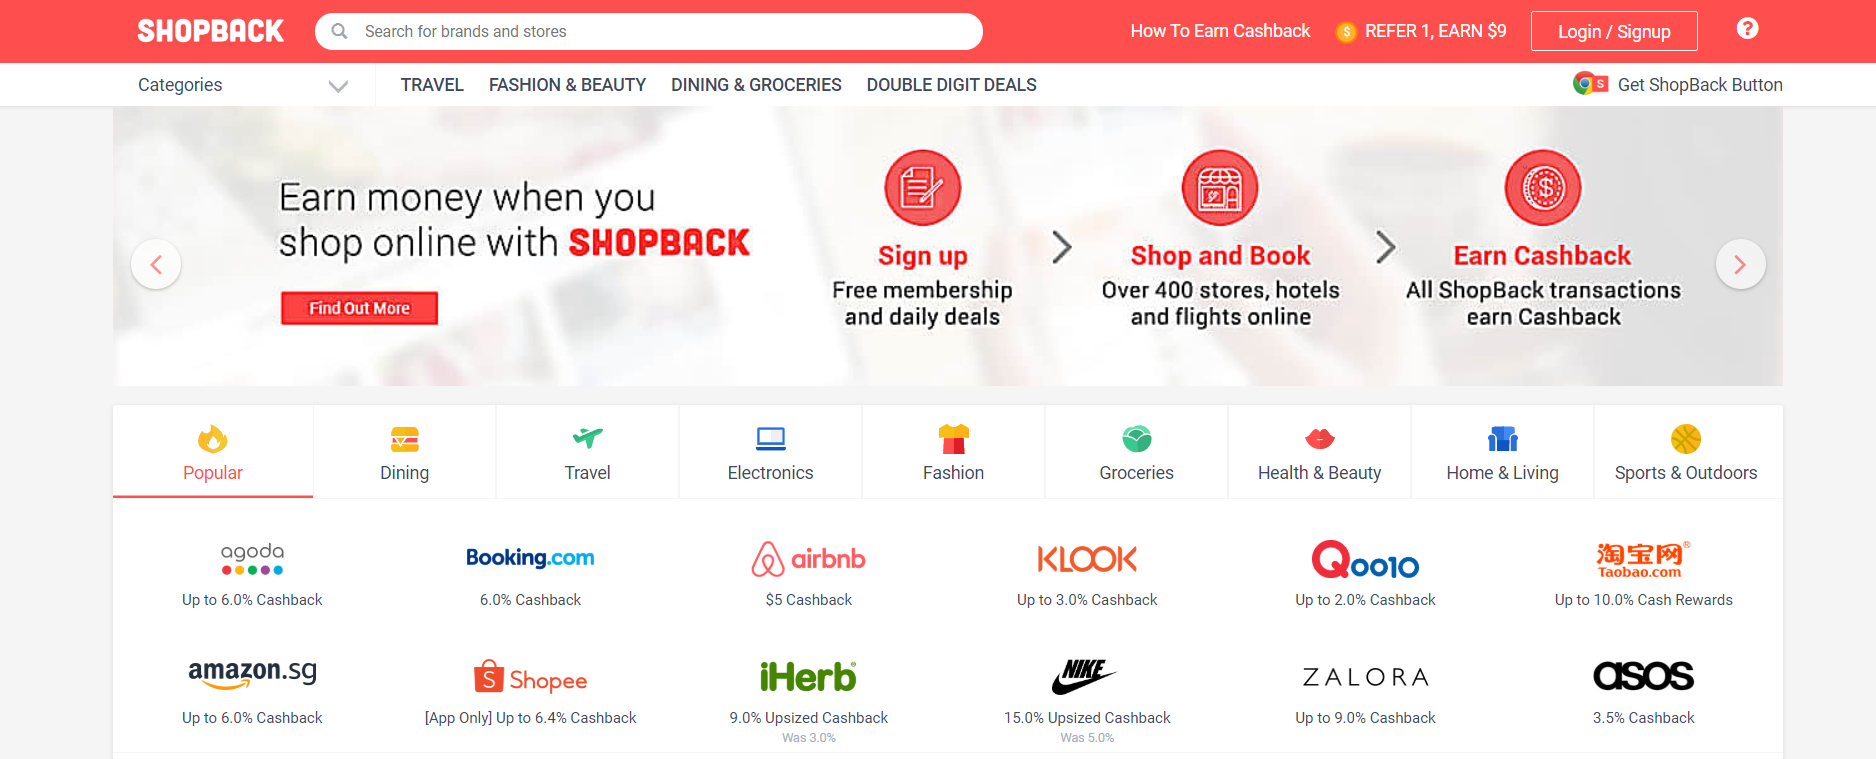 Top 10 Shopping Sites in Singapore - Shopback